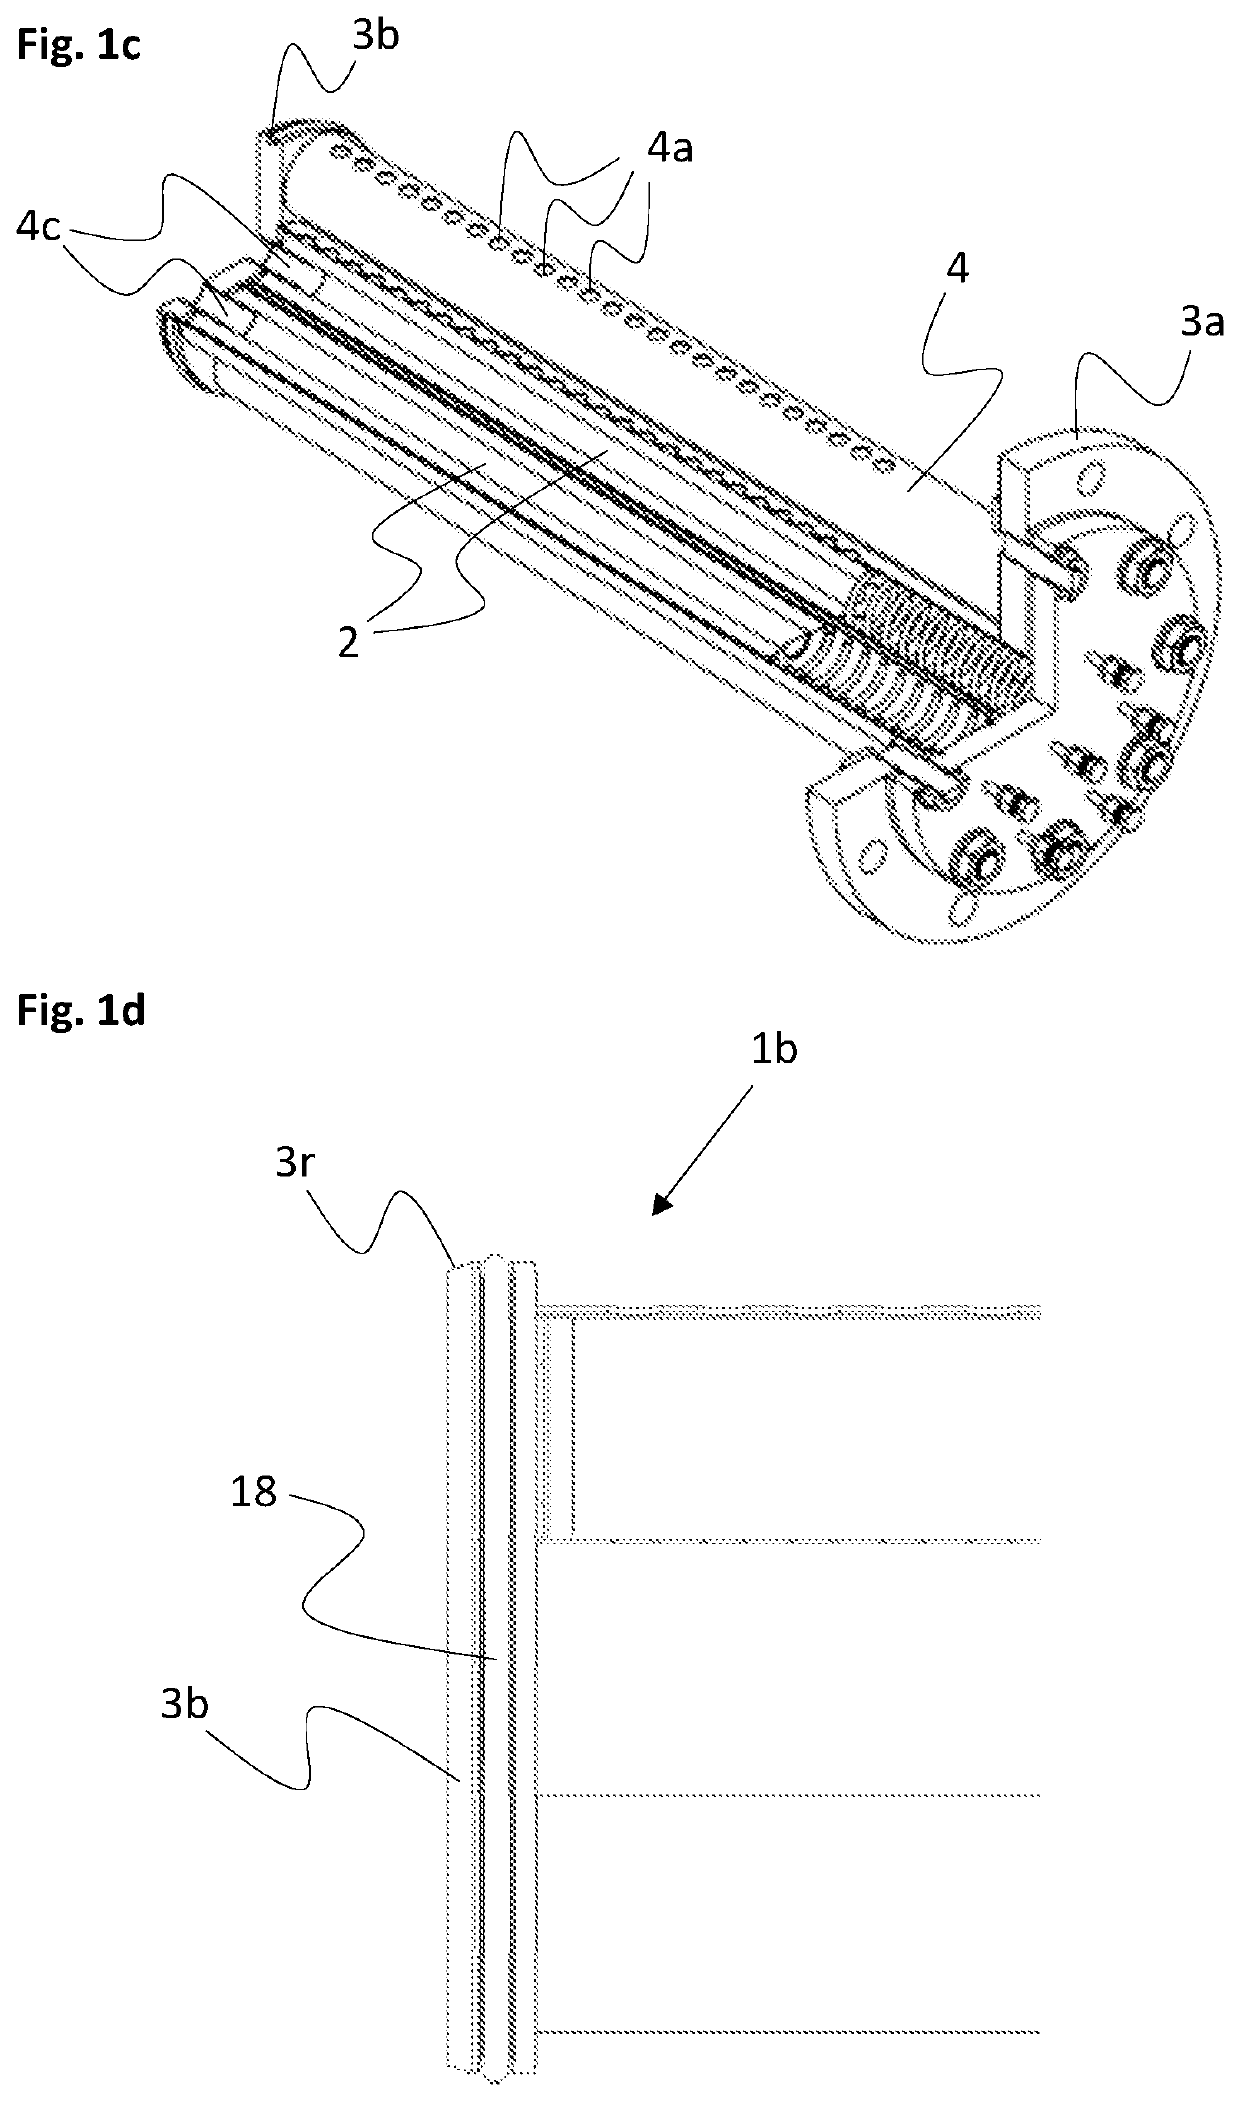 Filter assembly for plate heat exchangers and method of cleaning a working medium in a plate heat exchanger